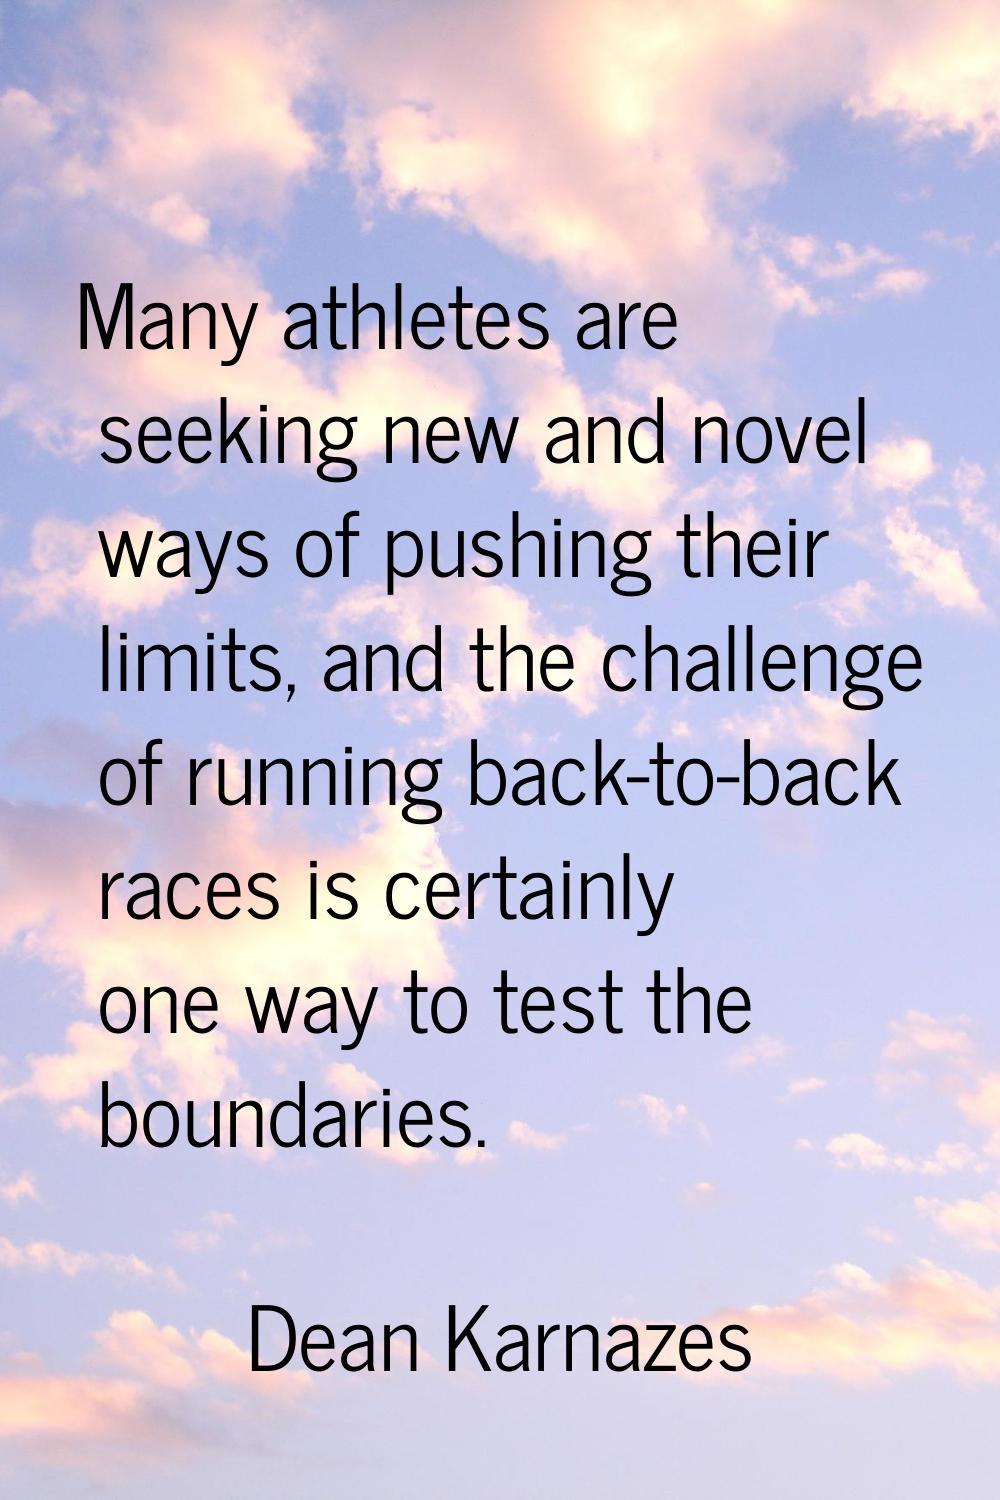 Many athletes are seeking new and novel ways of pushing their limits, and the challenge of running 